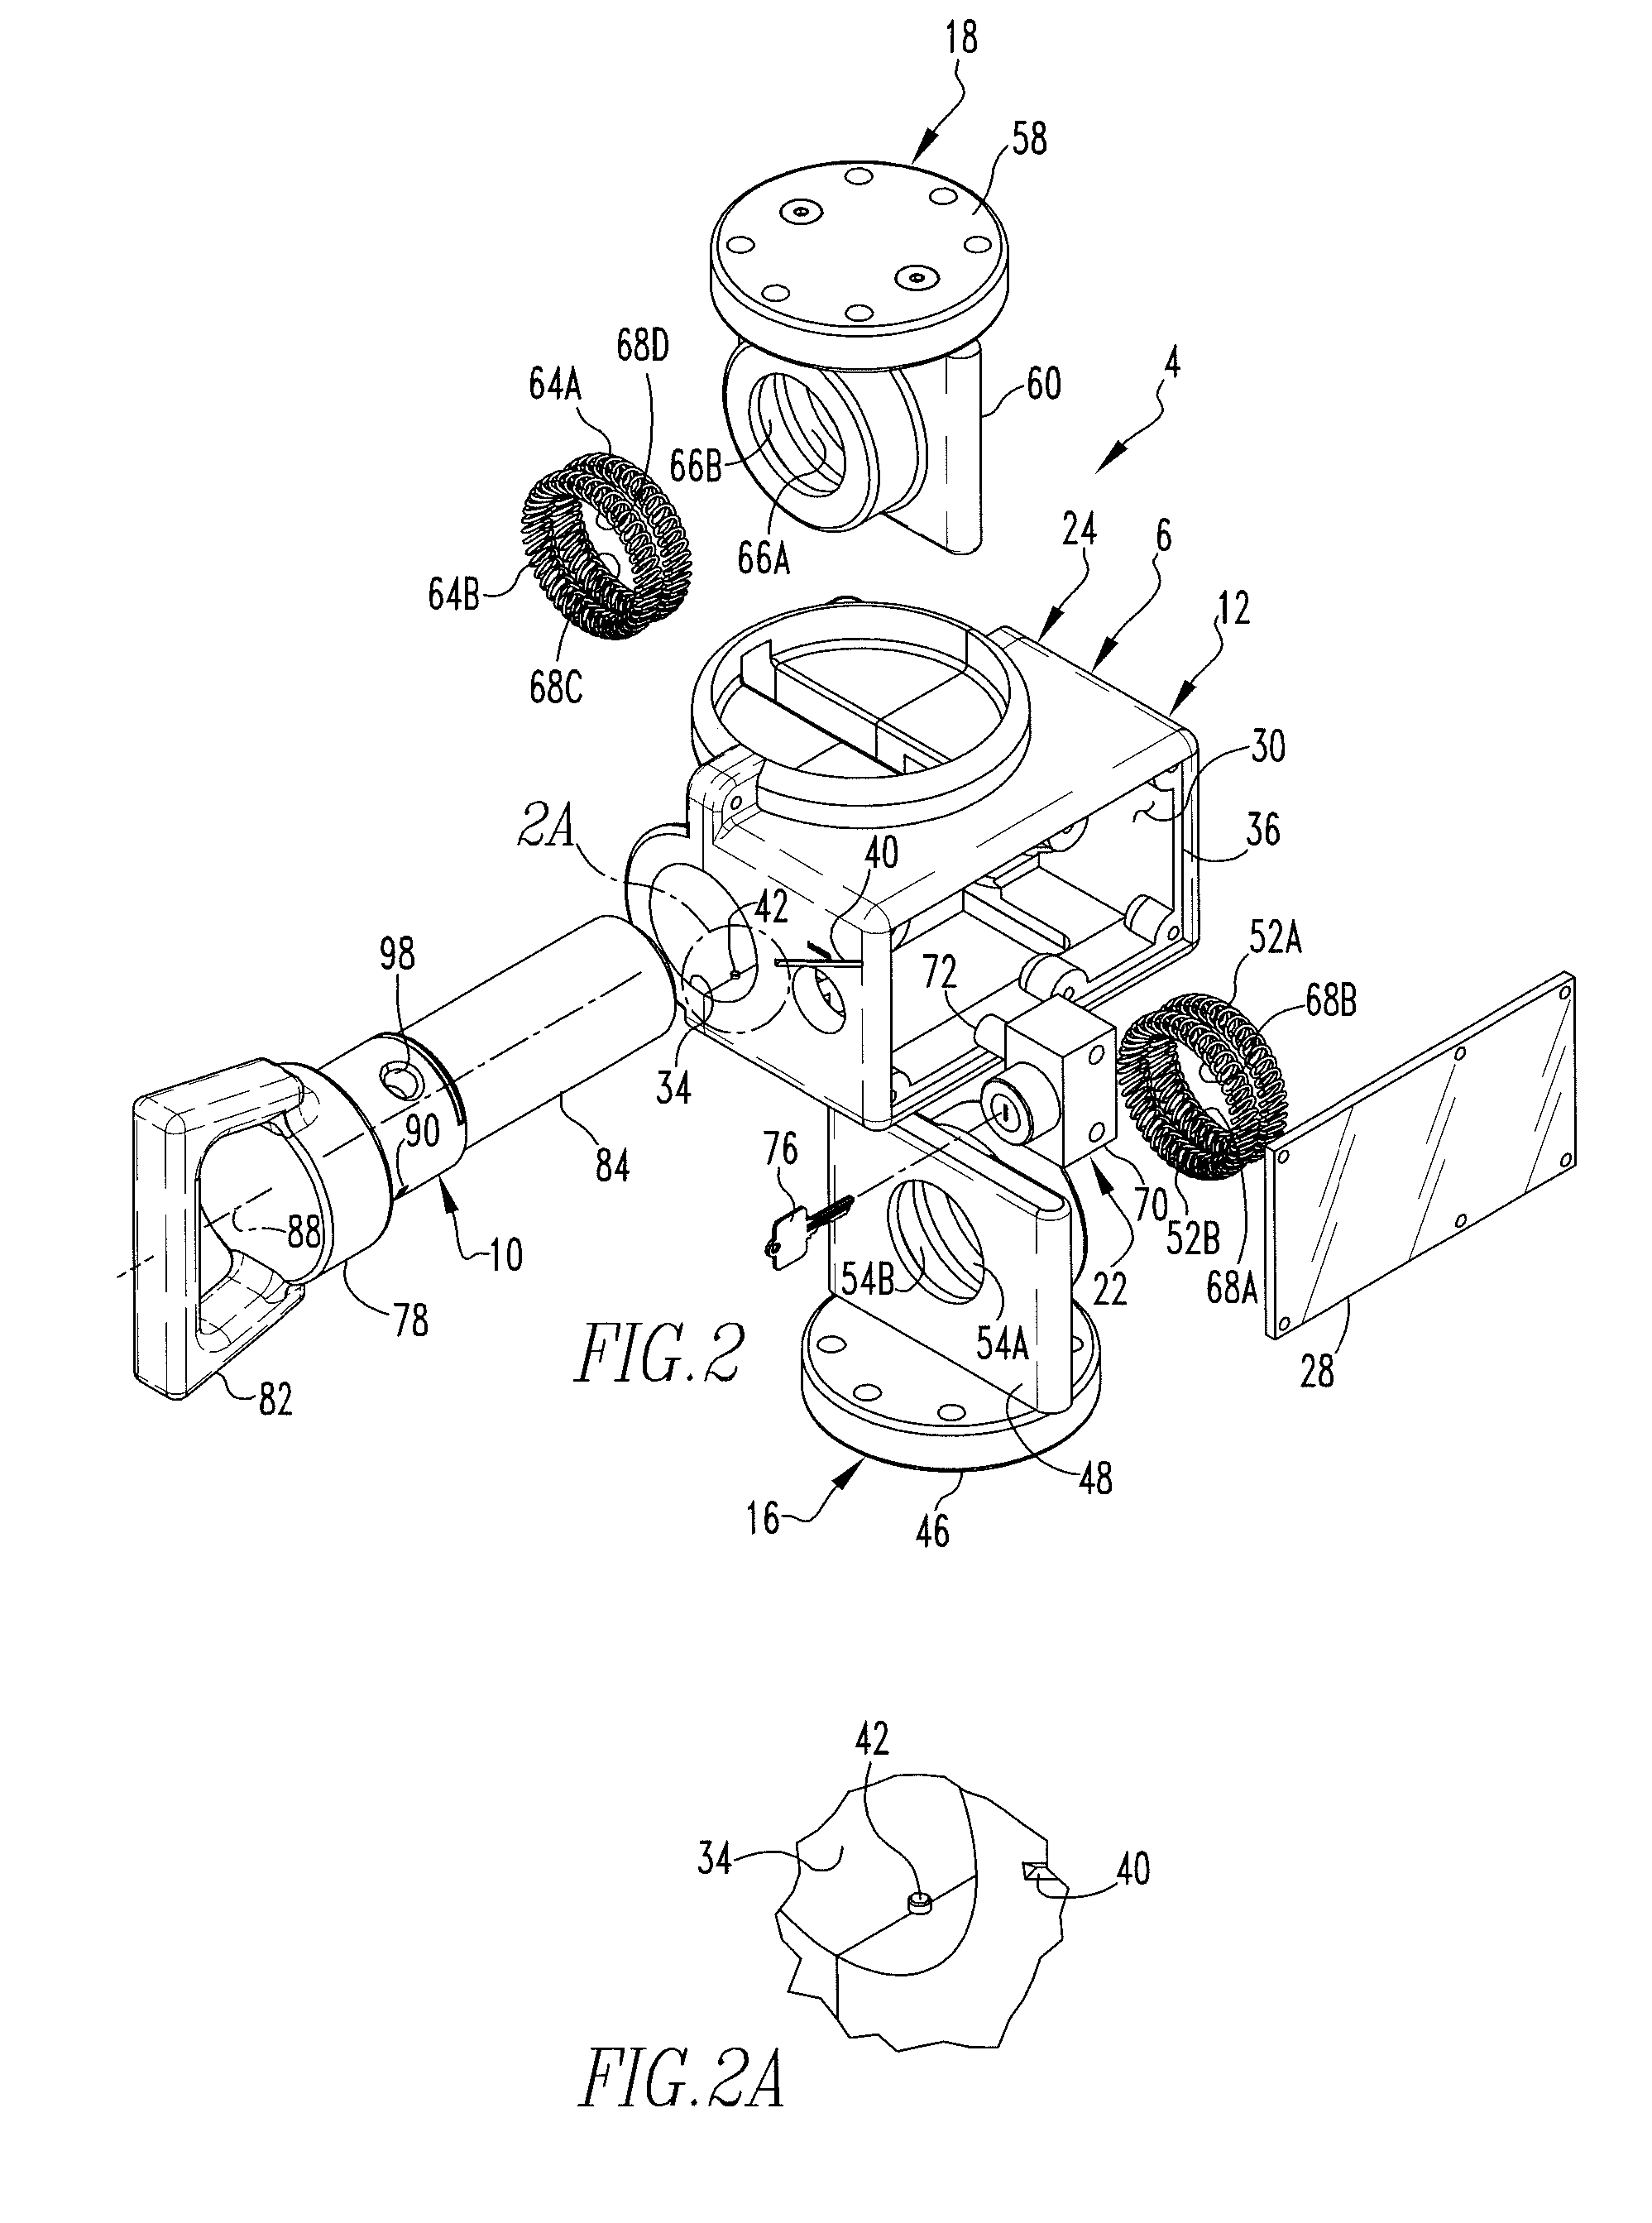 Electrical disconnect apparatus